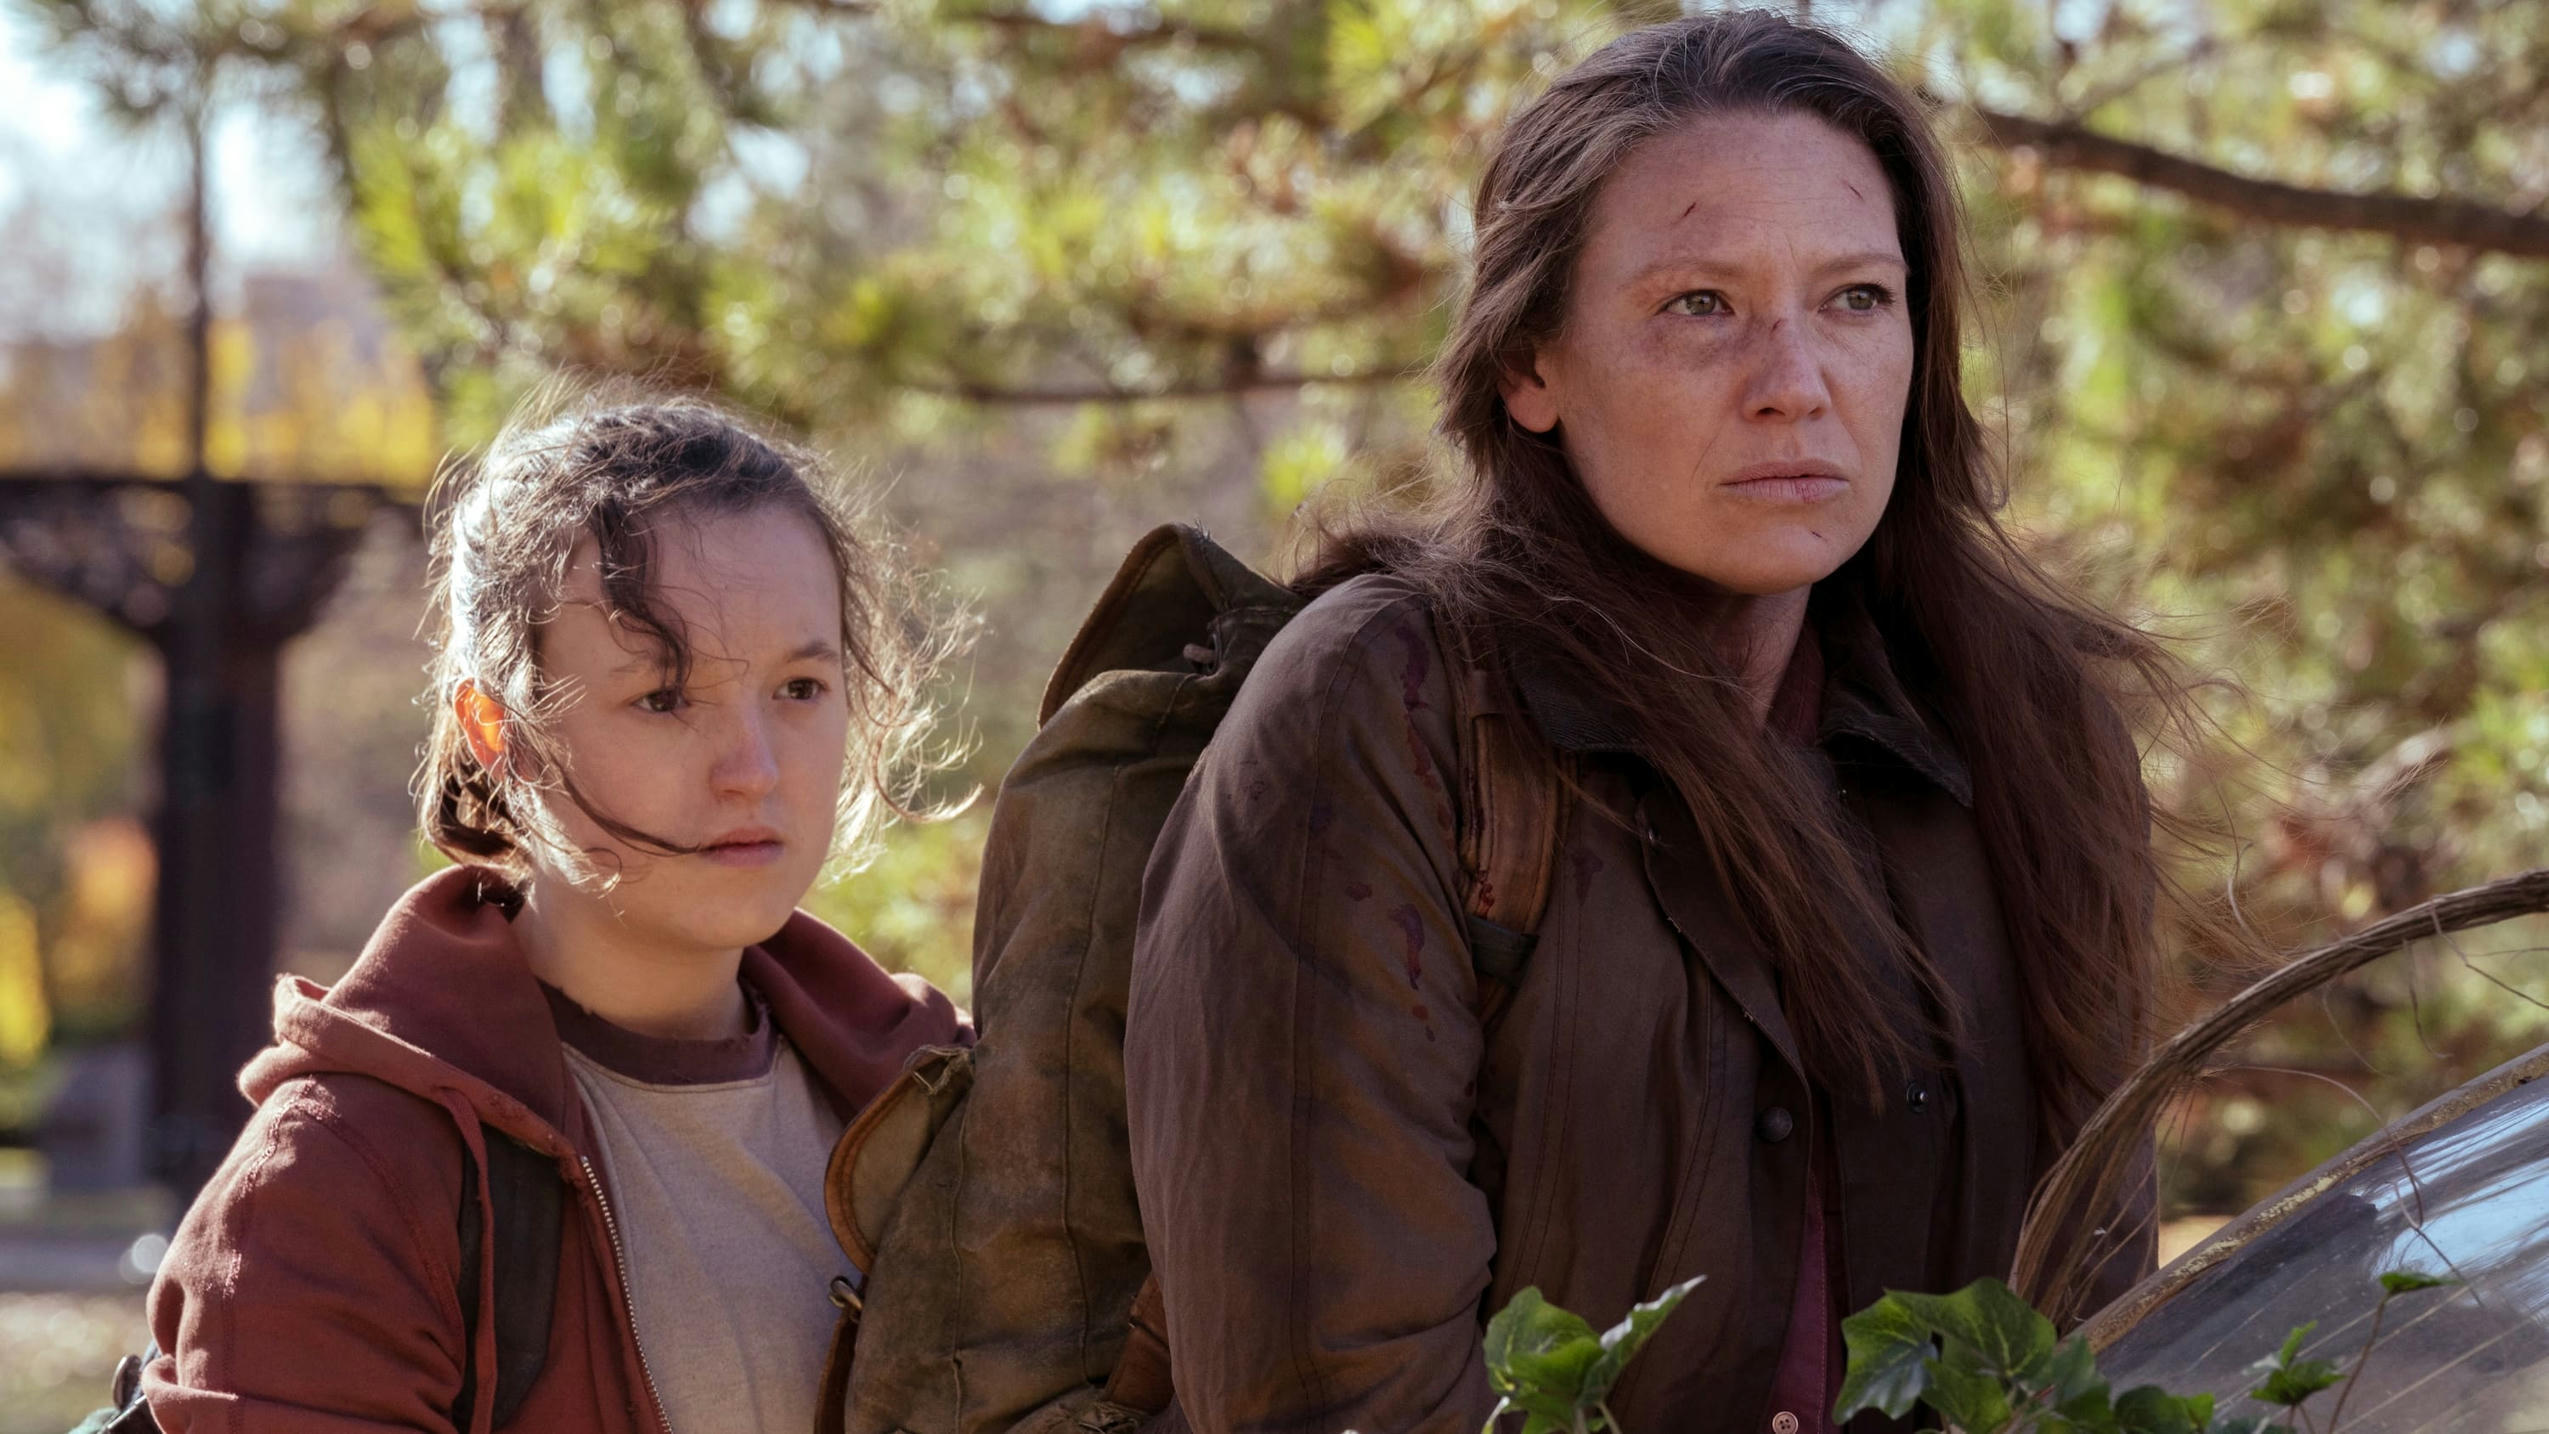 Episode 2 of HBO's The Last of Us breaks even more records